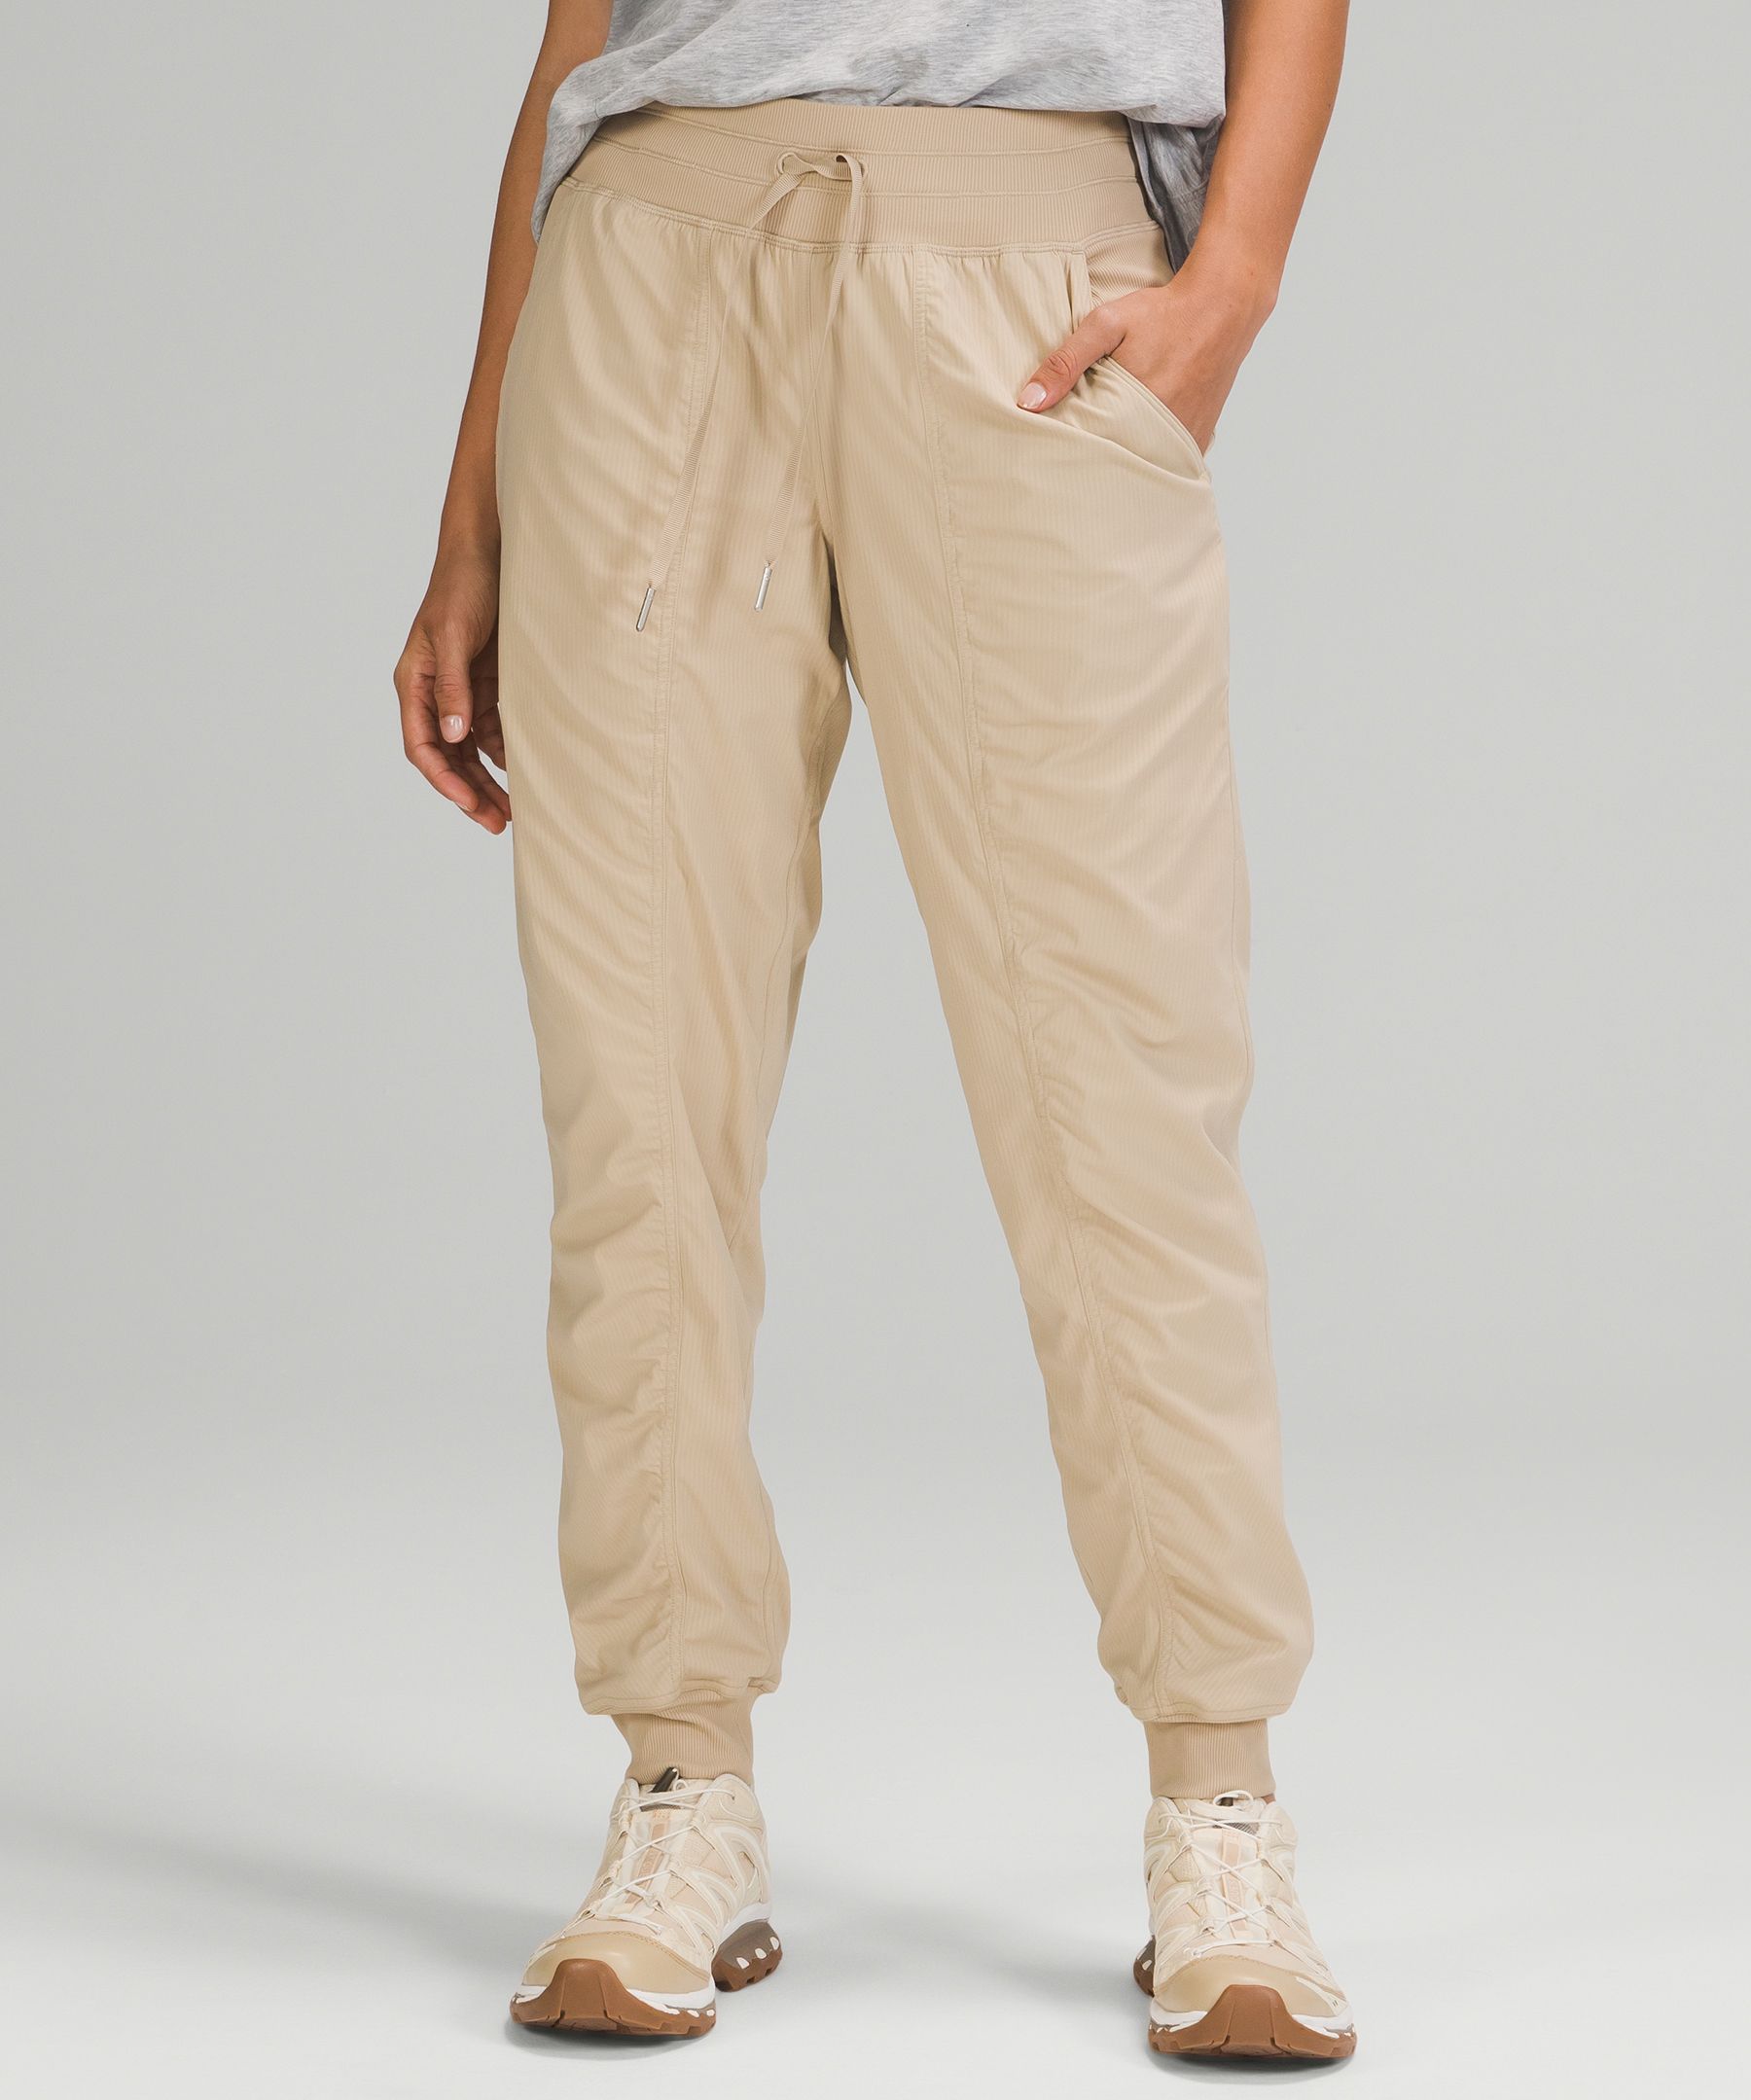 Lululemon Dance Studio Joggers Lined In Trench